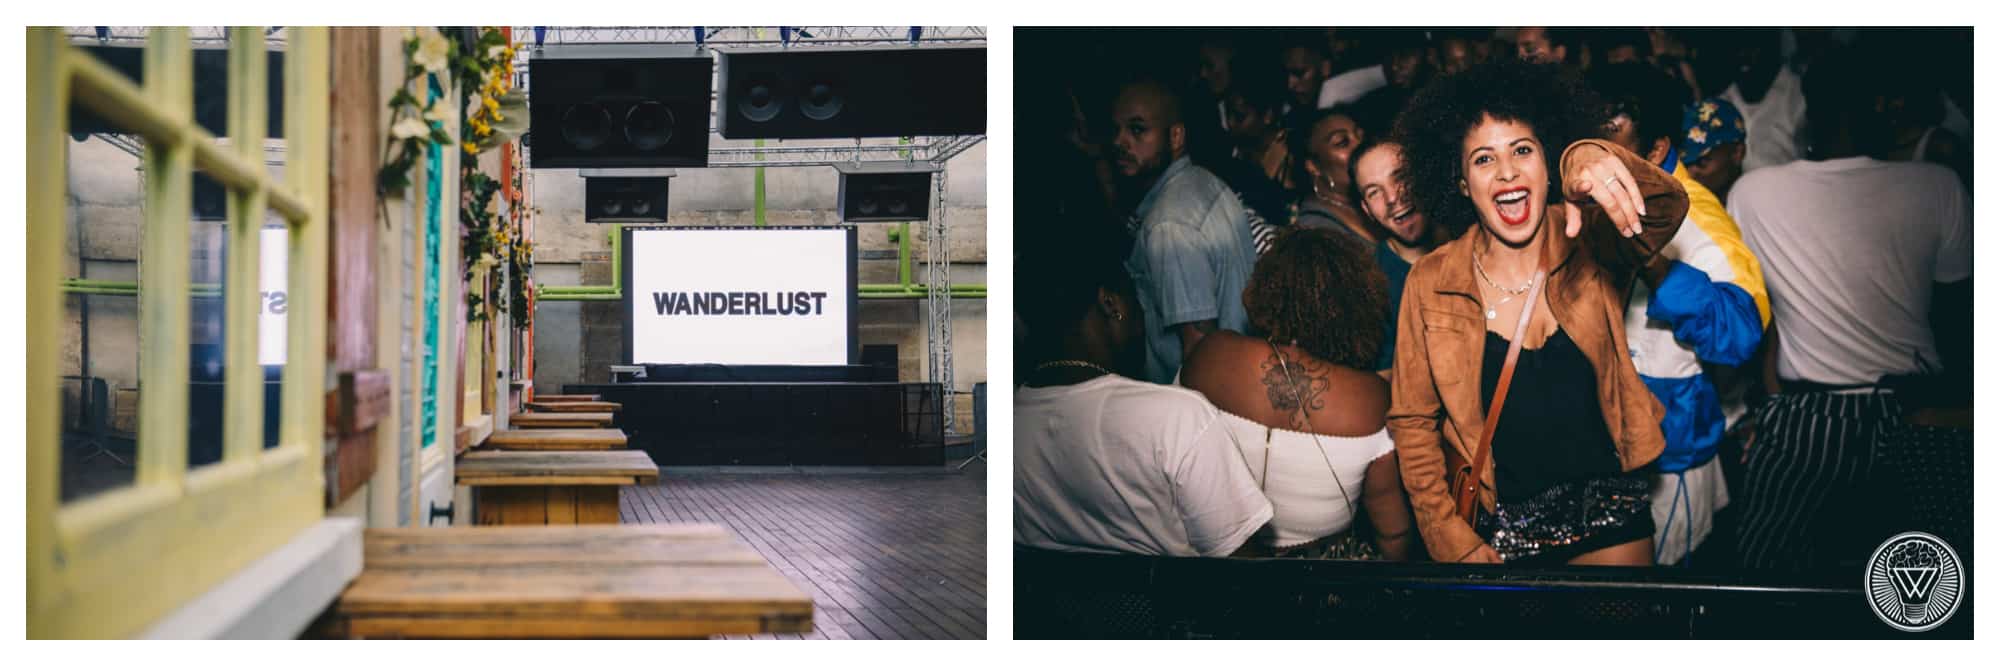 An empty dance floor with a TV screen with the words Wanderlust on it and speakers above (left). A woman pointing at the photographer and smiling on the dance floor of a night club (right).